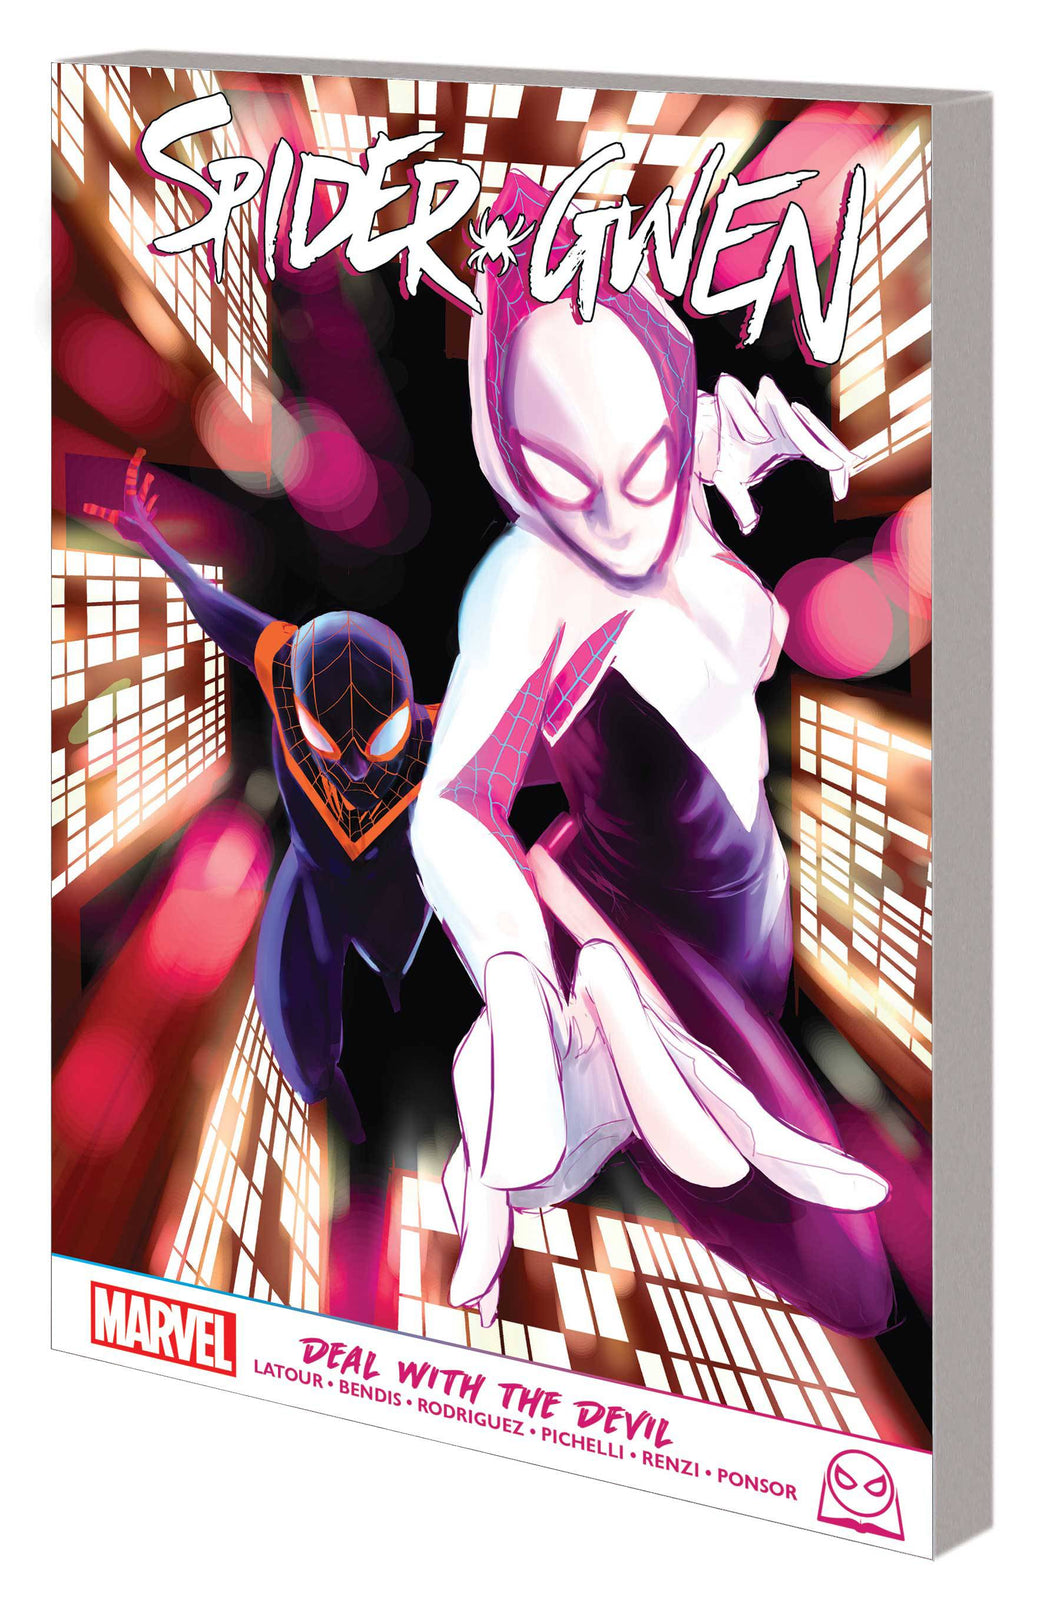 Spider-Gwen GN TP Deal With Devil - Books